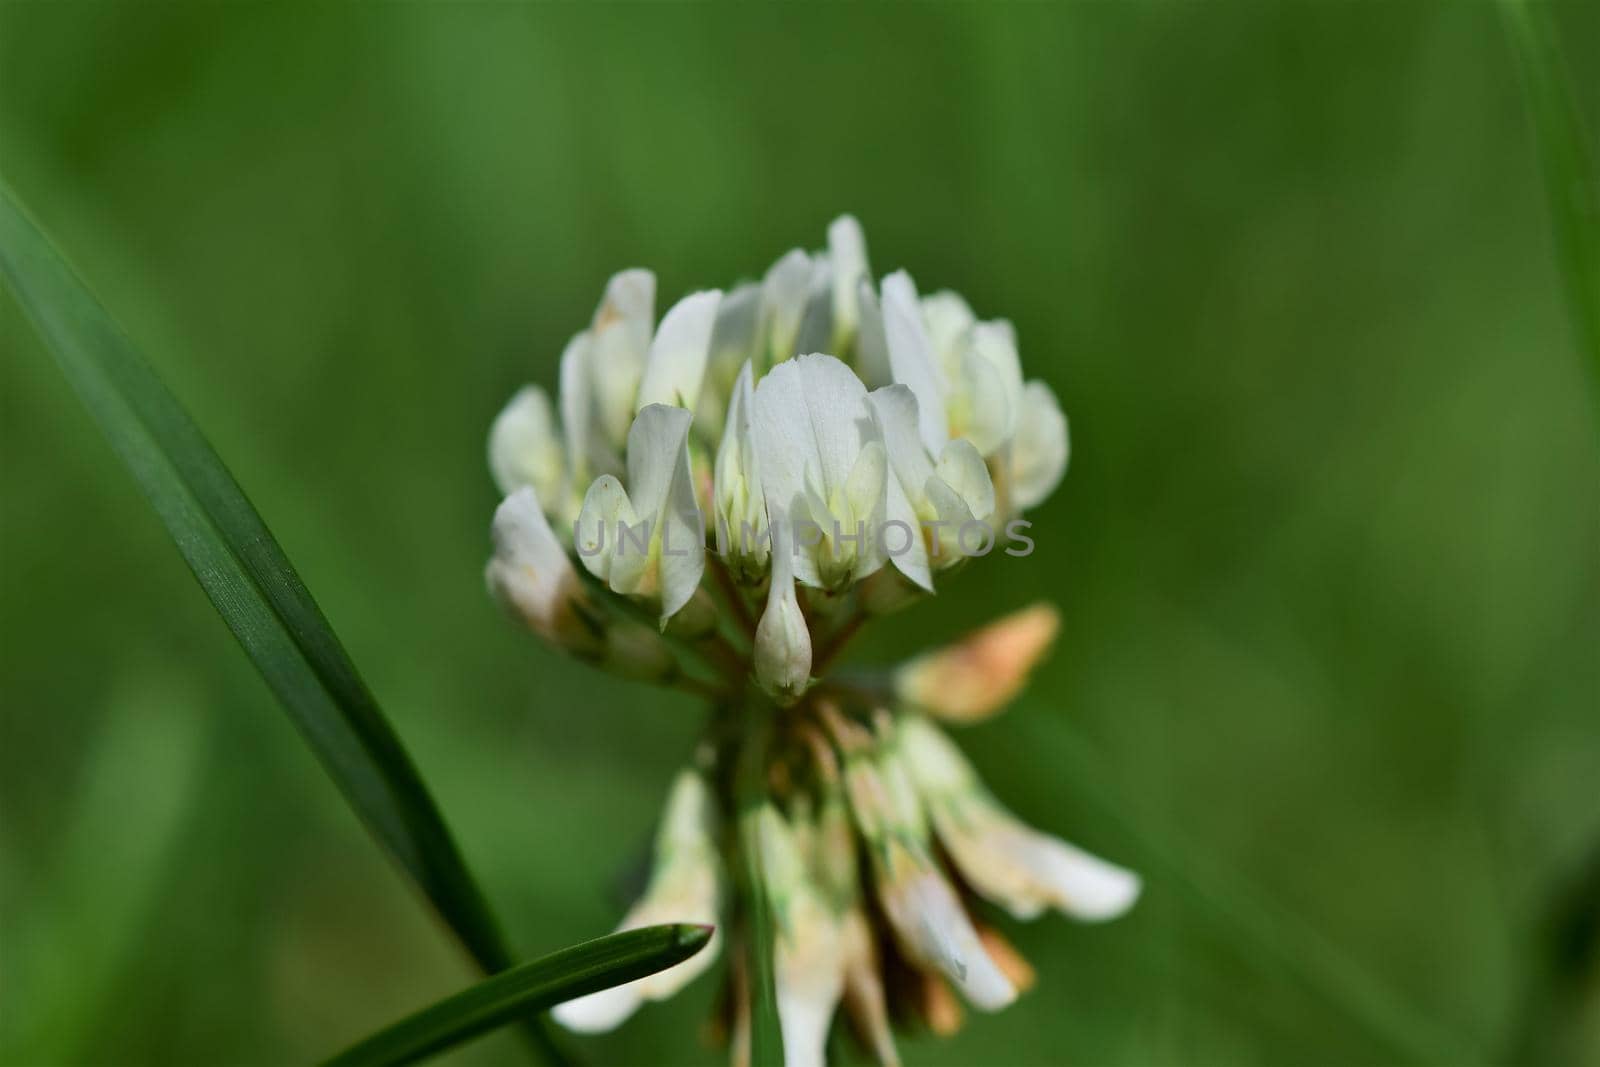 White clover blossom against green blurred grasses as background by Luise123